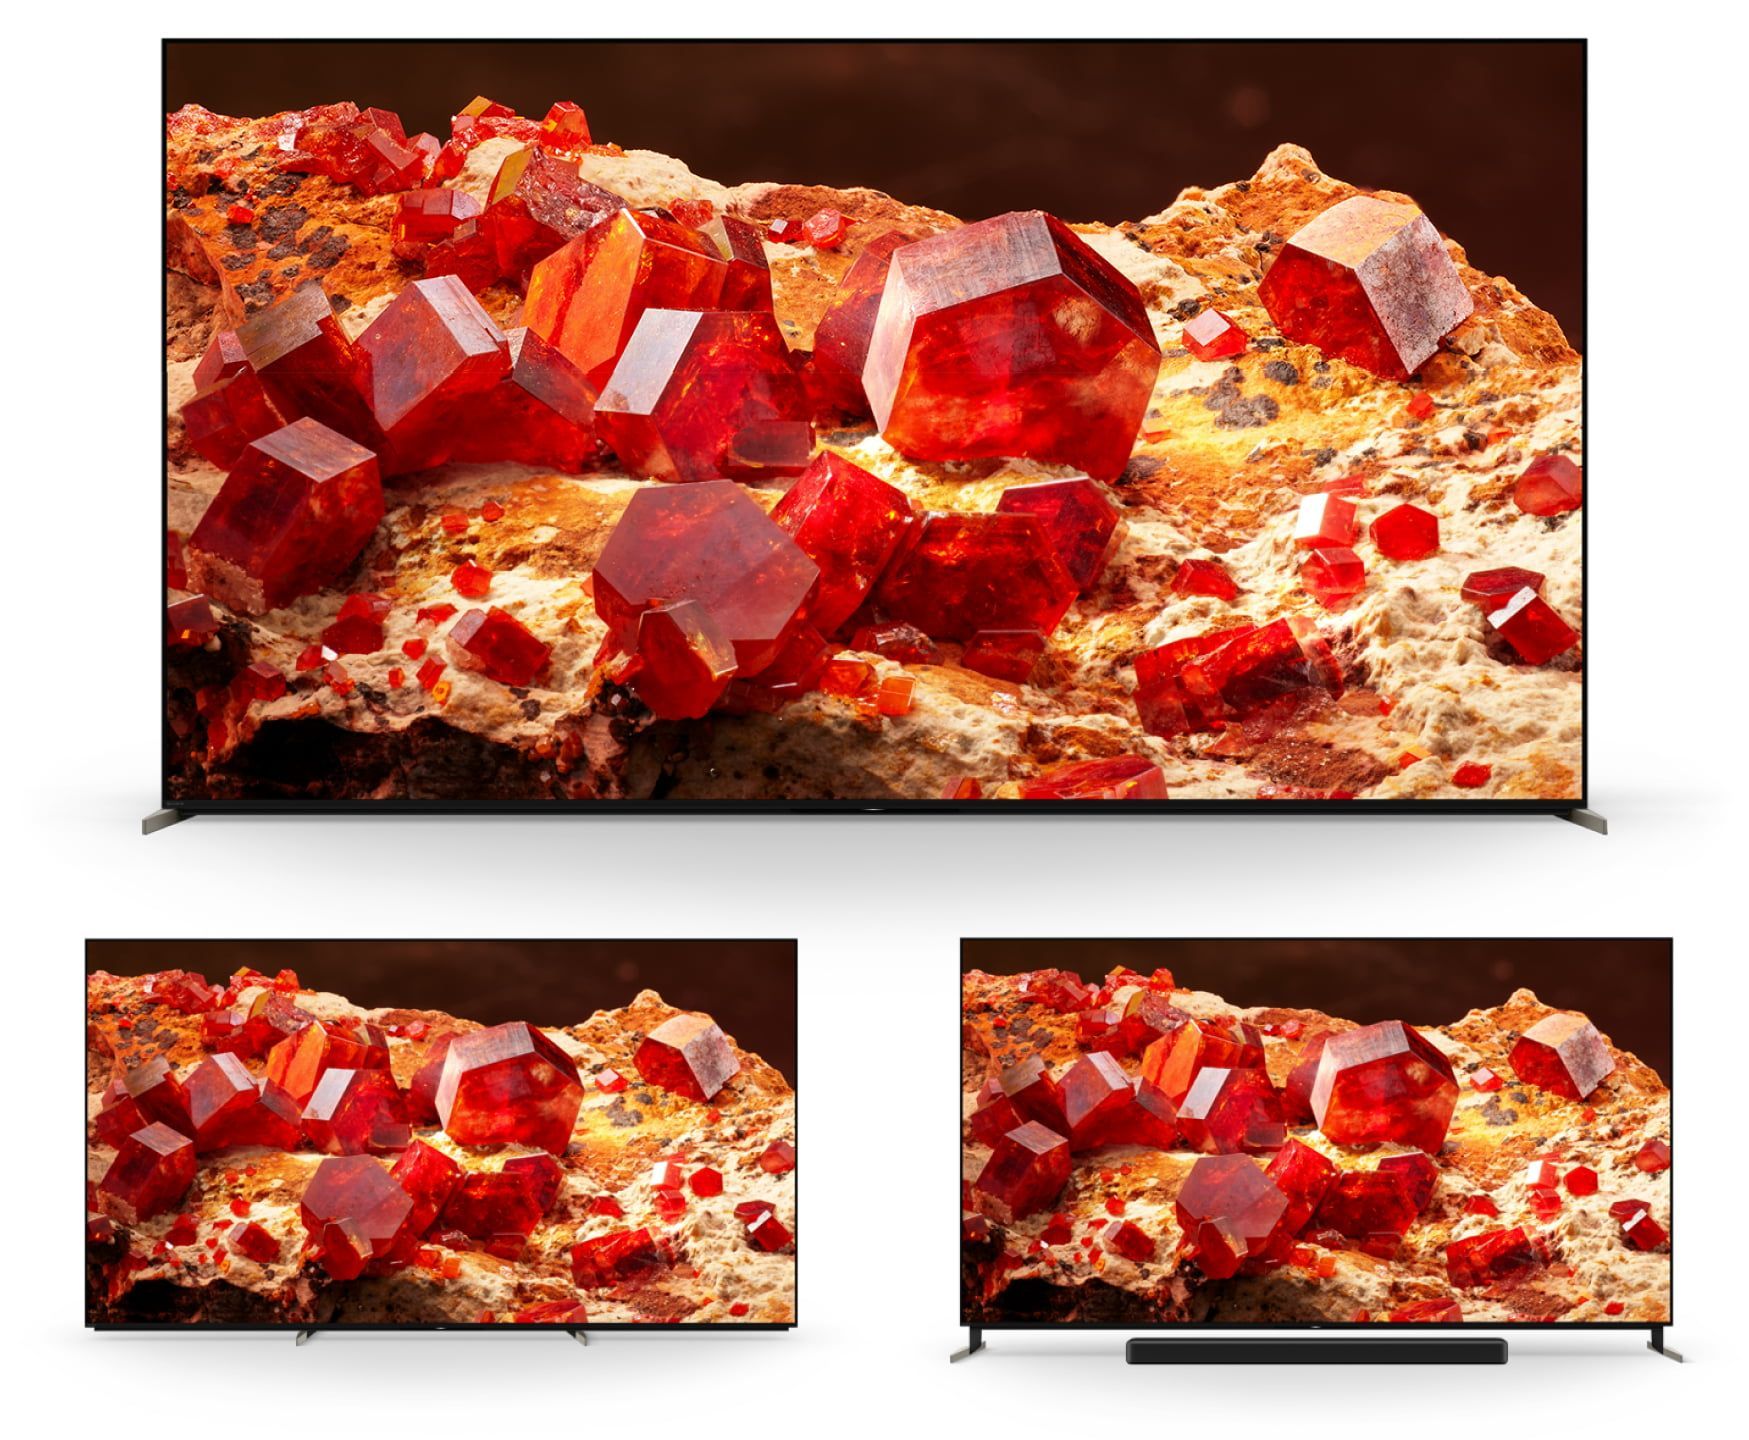 a picture of red crystals on a rock on a tv showing the sony mini led stand height options to work with a soundbar